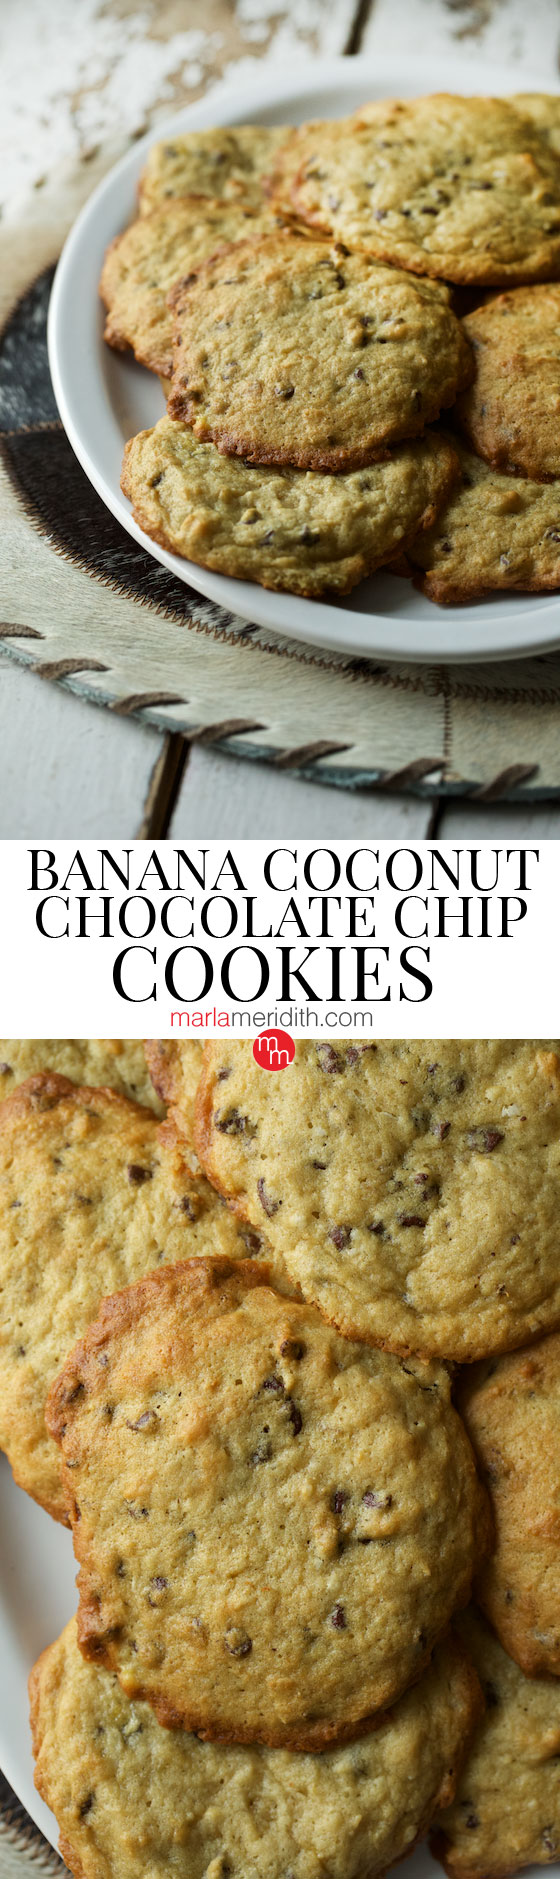 Banana Coconut & Chocolate Chip Cookies, find this #recipe & many more on MarlaMeridith.com ( @marlameridith )